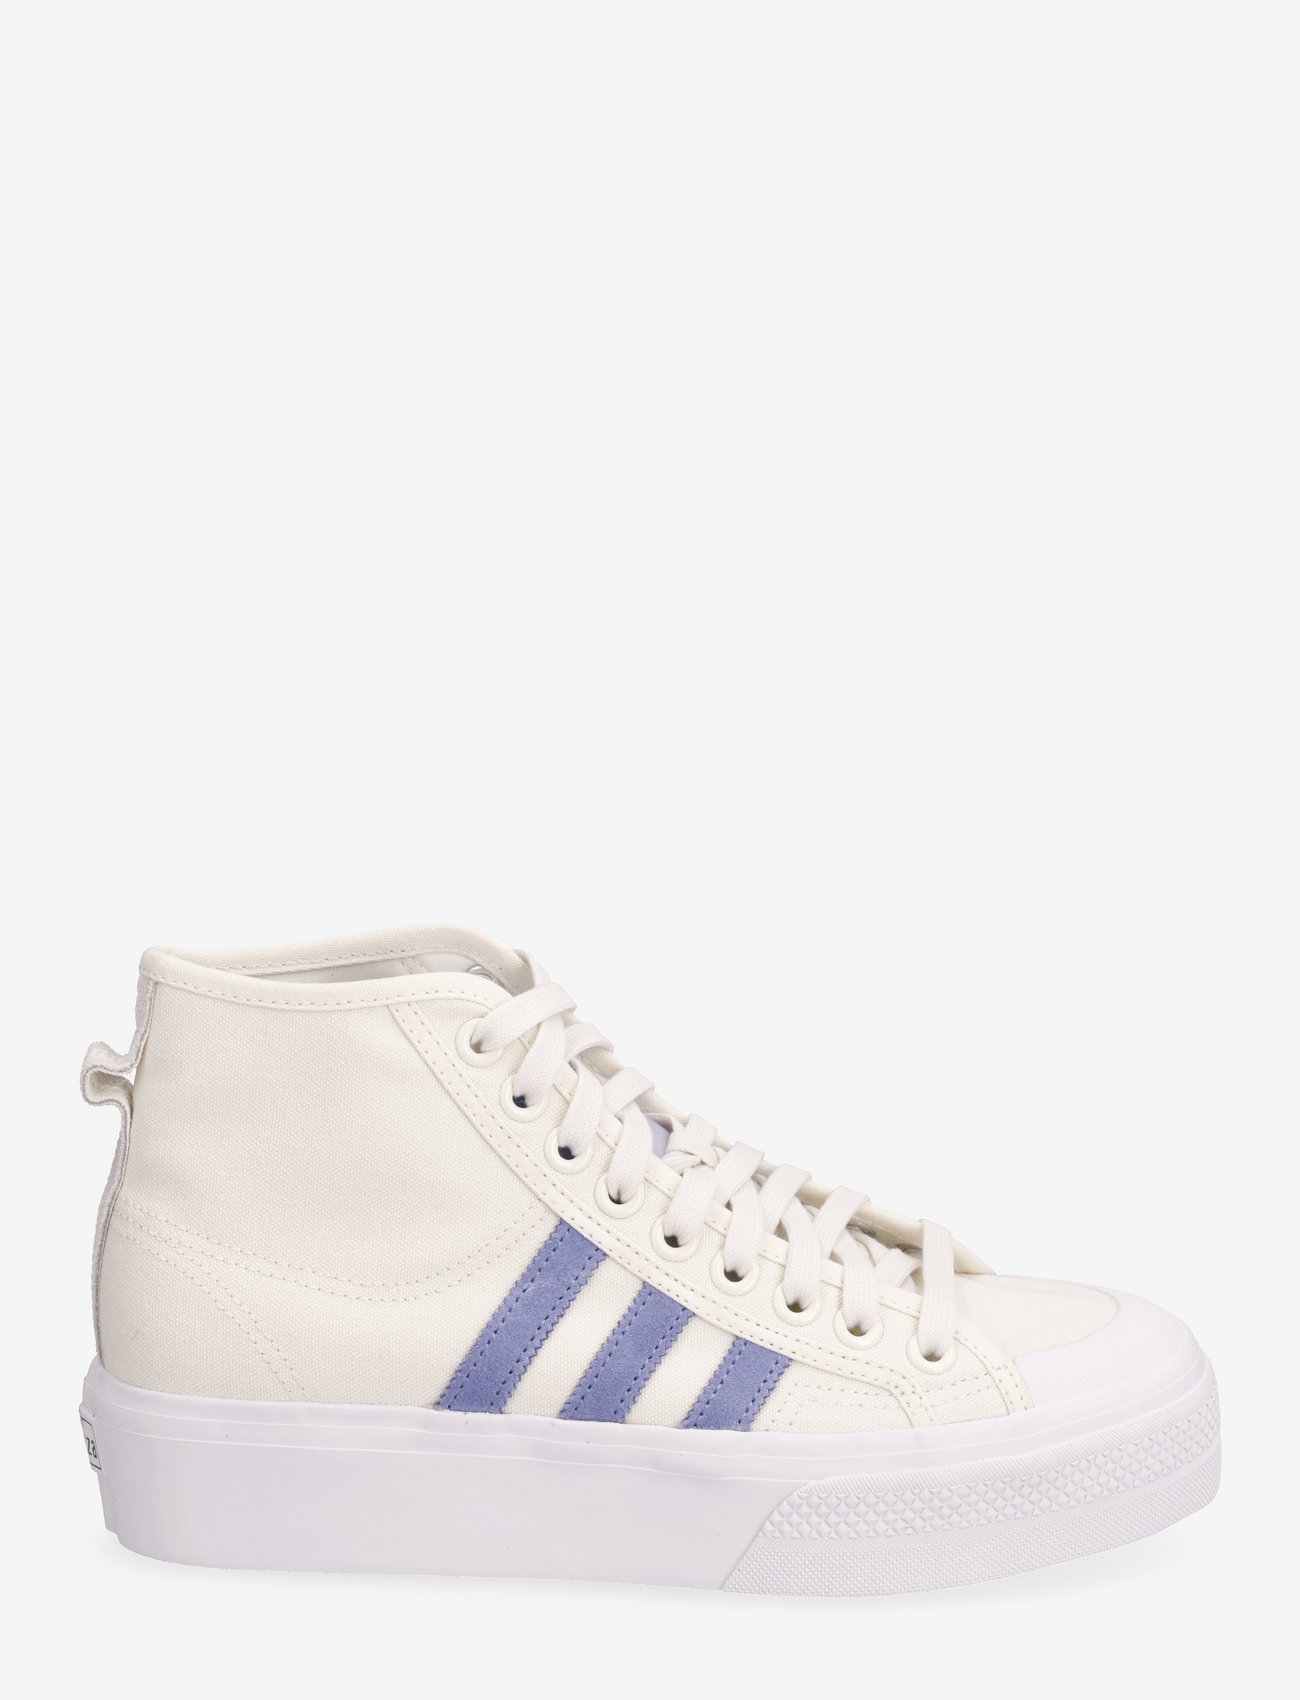 adidas Originals - Nizza Platform Mid Shoes - chunky sneakers - owhite/blufus/ftwwht - 1